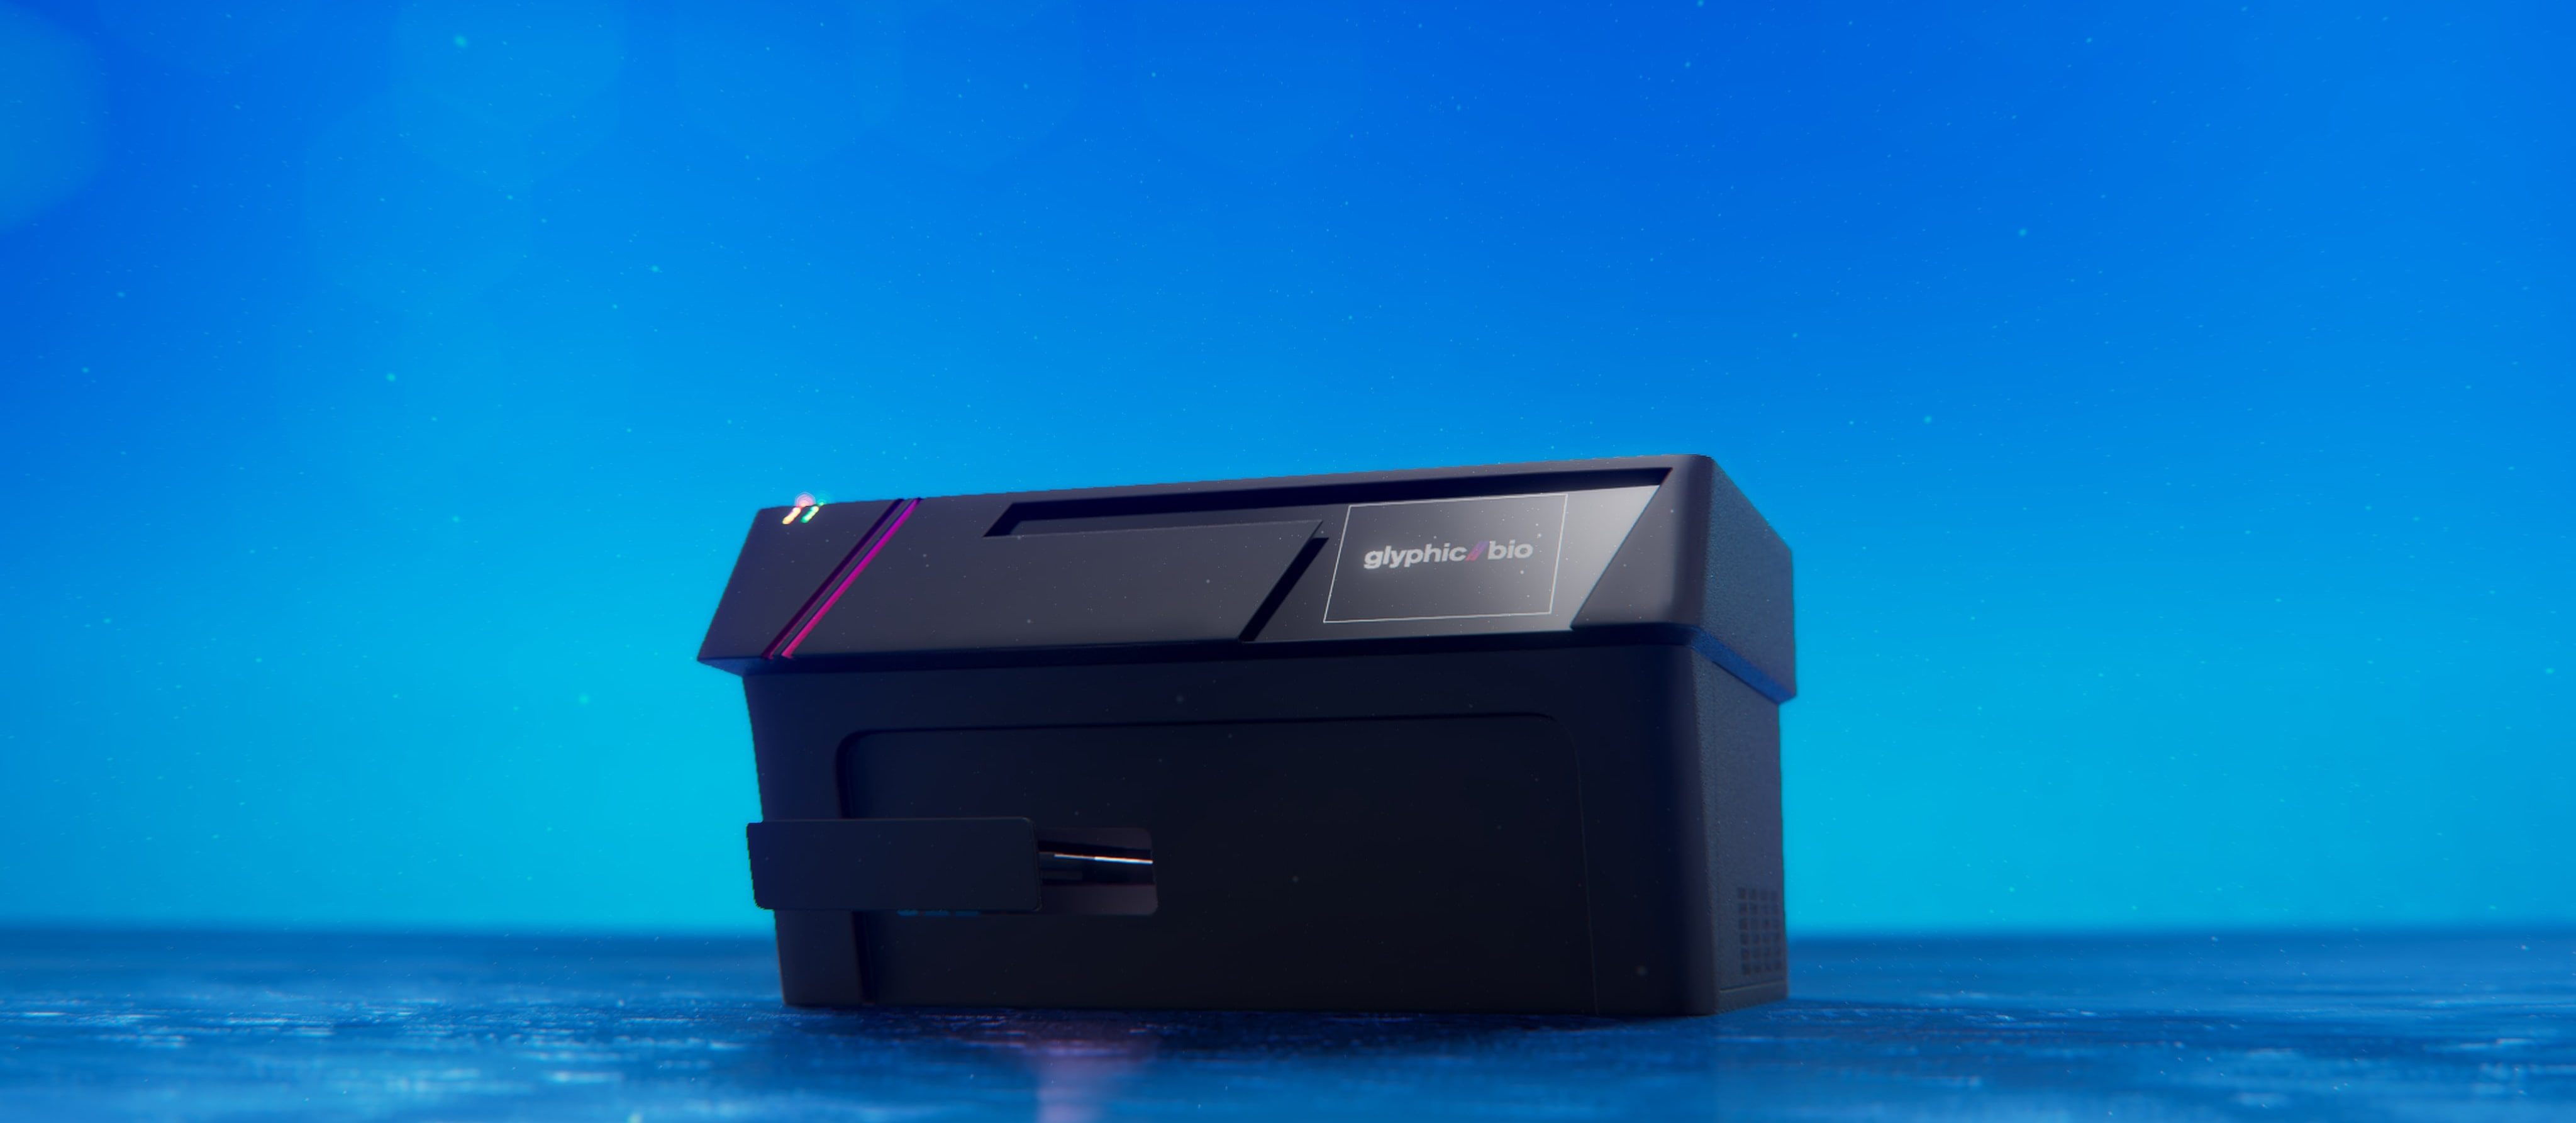 3D rendered product design of a protein sequencer for Glyphic on blue background